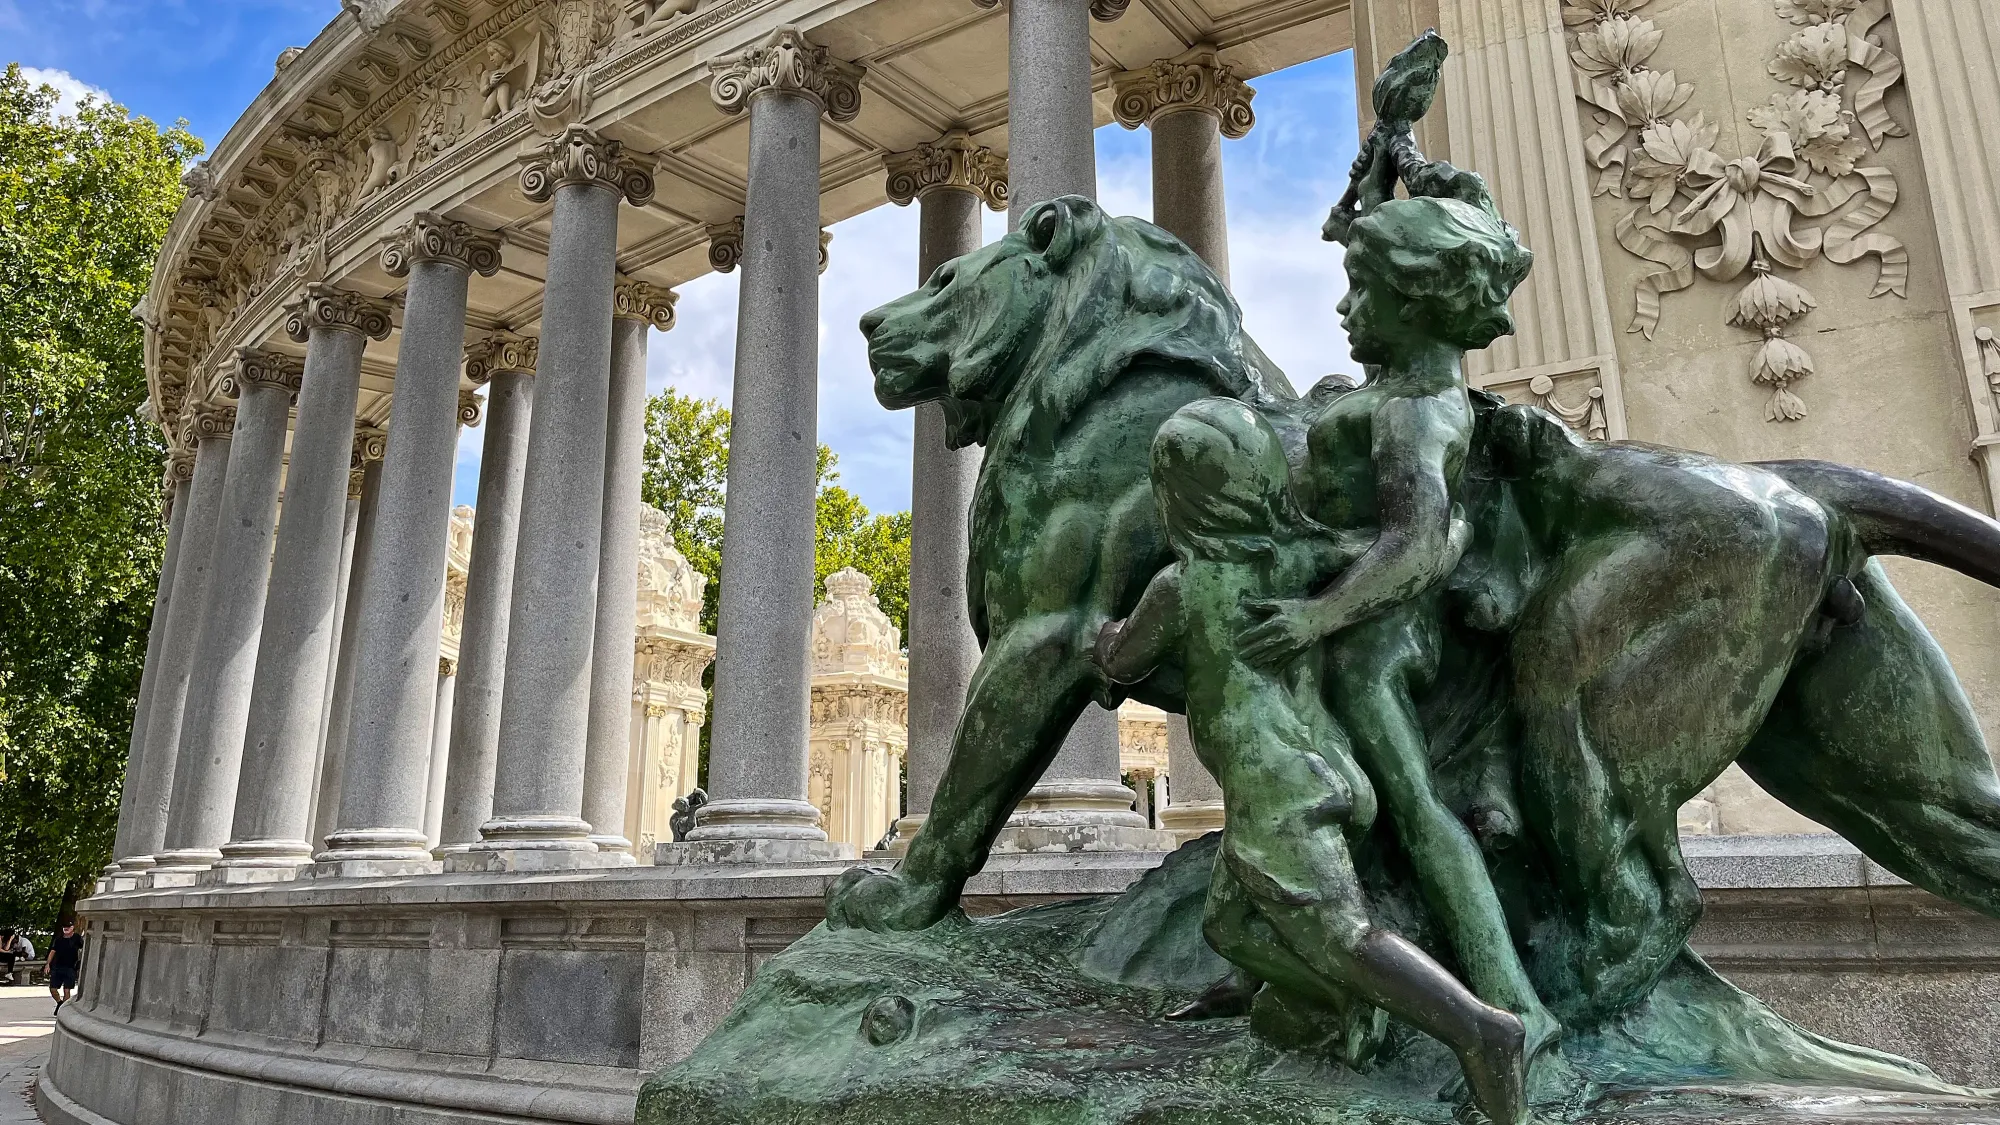 Statue of a lion and two children in front of a curved row of columns